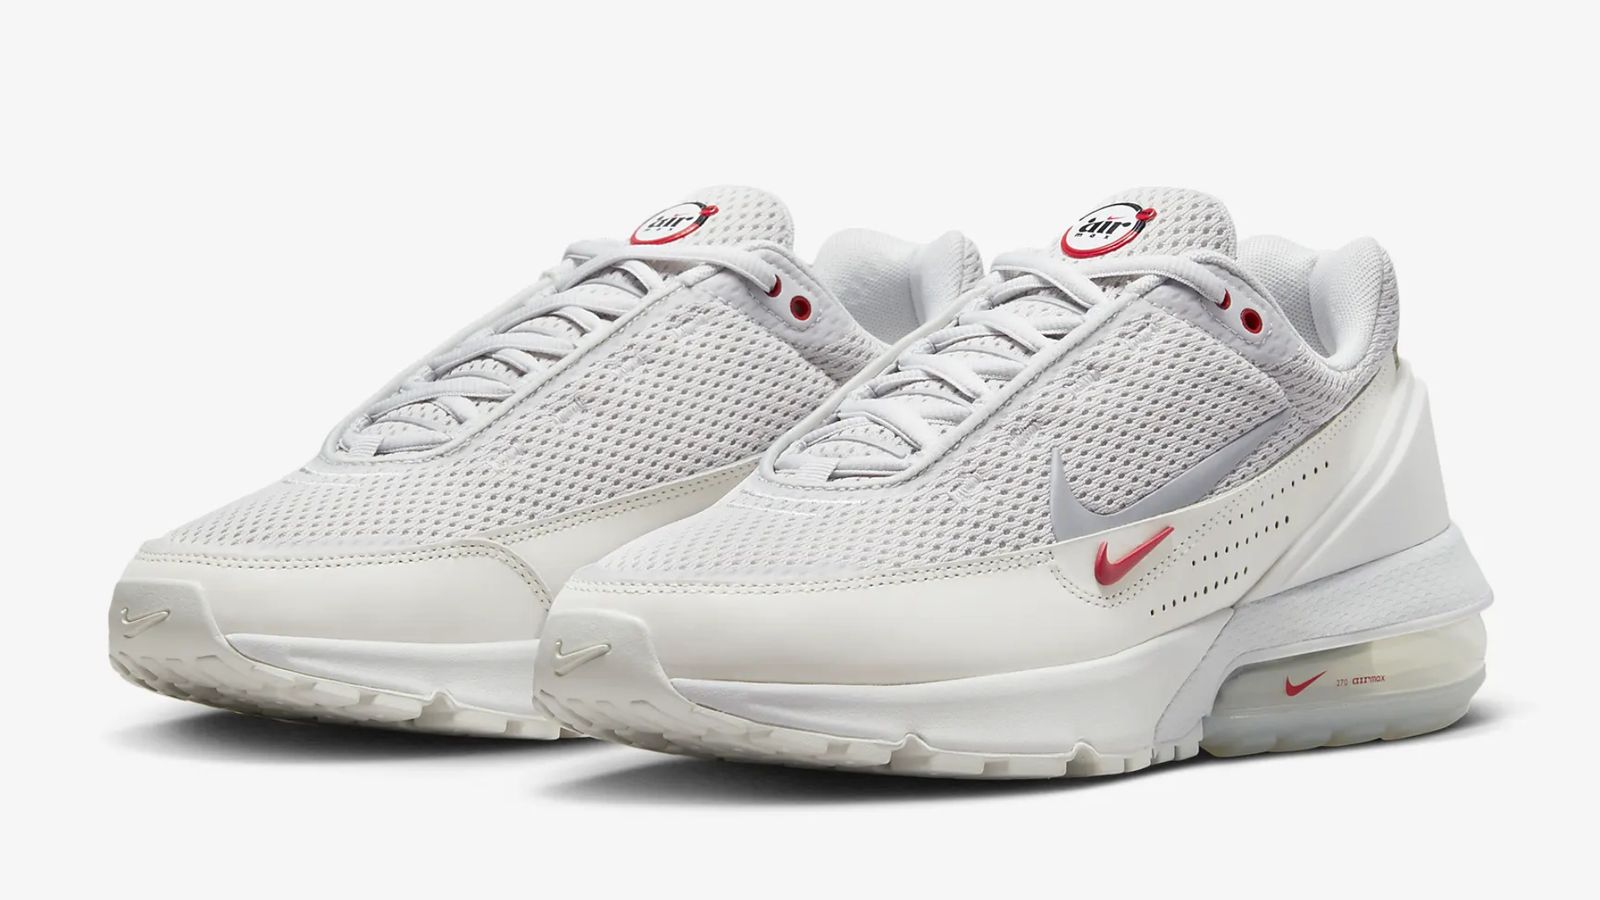 Air Max Day 2023 - Nike Air Max Pulse "Phantom High Pulse" product image of a white pair of mesh sneakers with red accents.